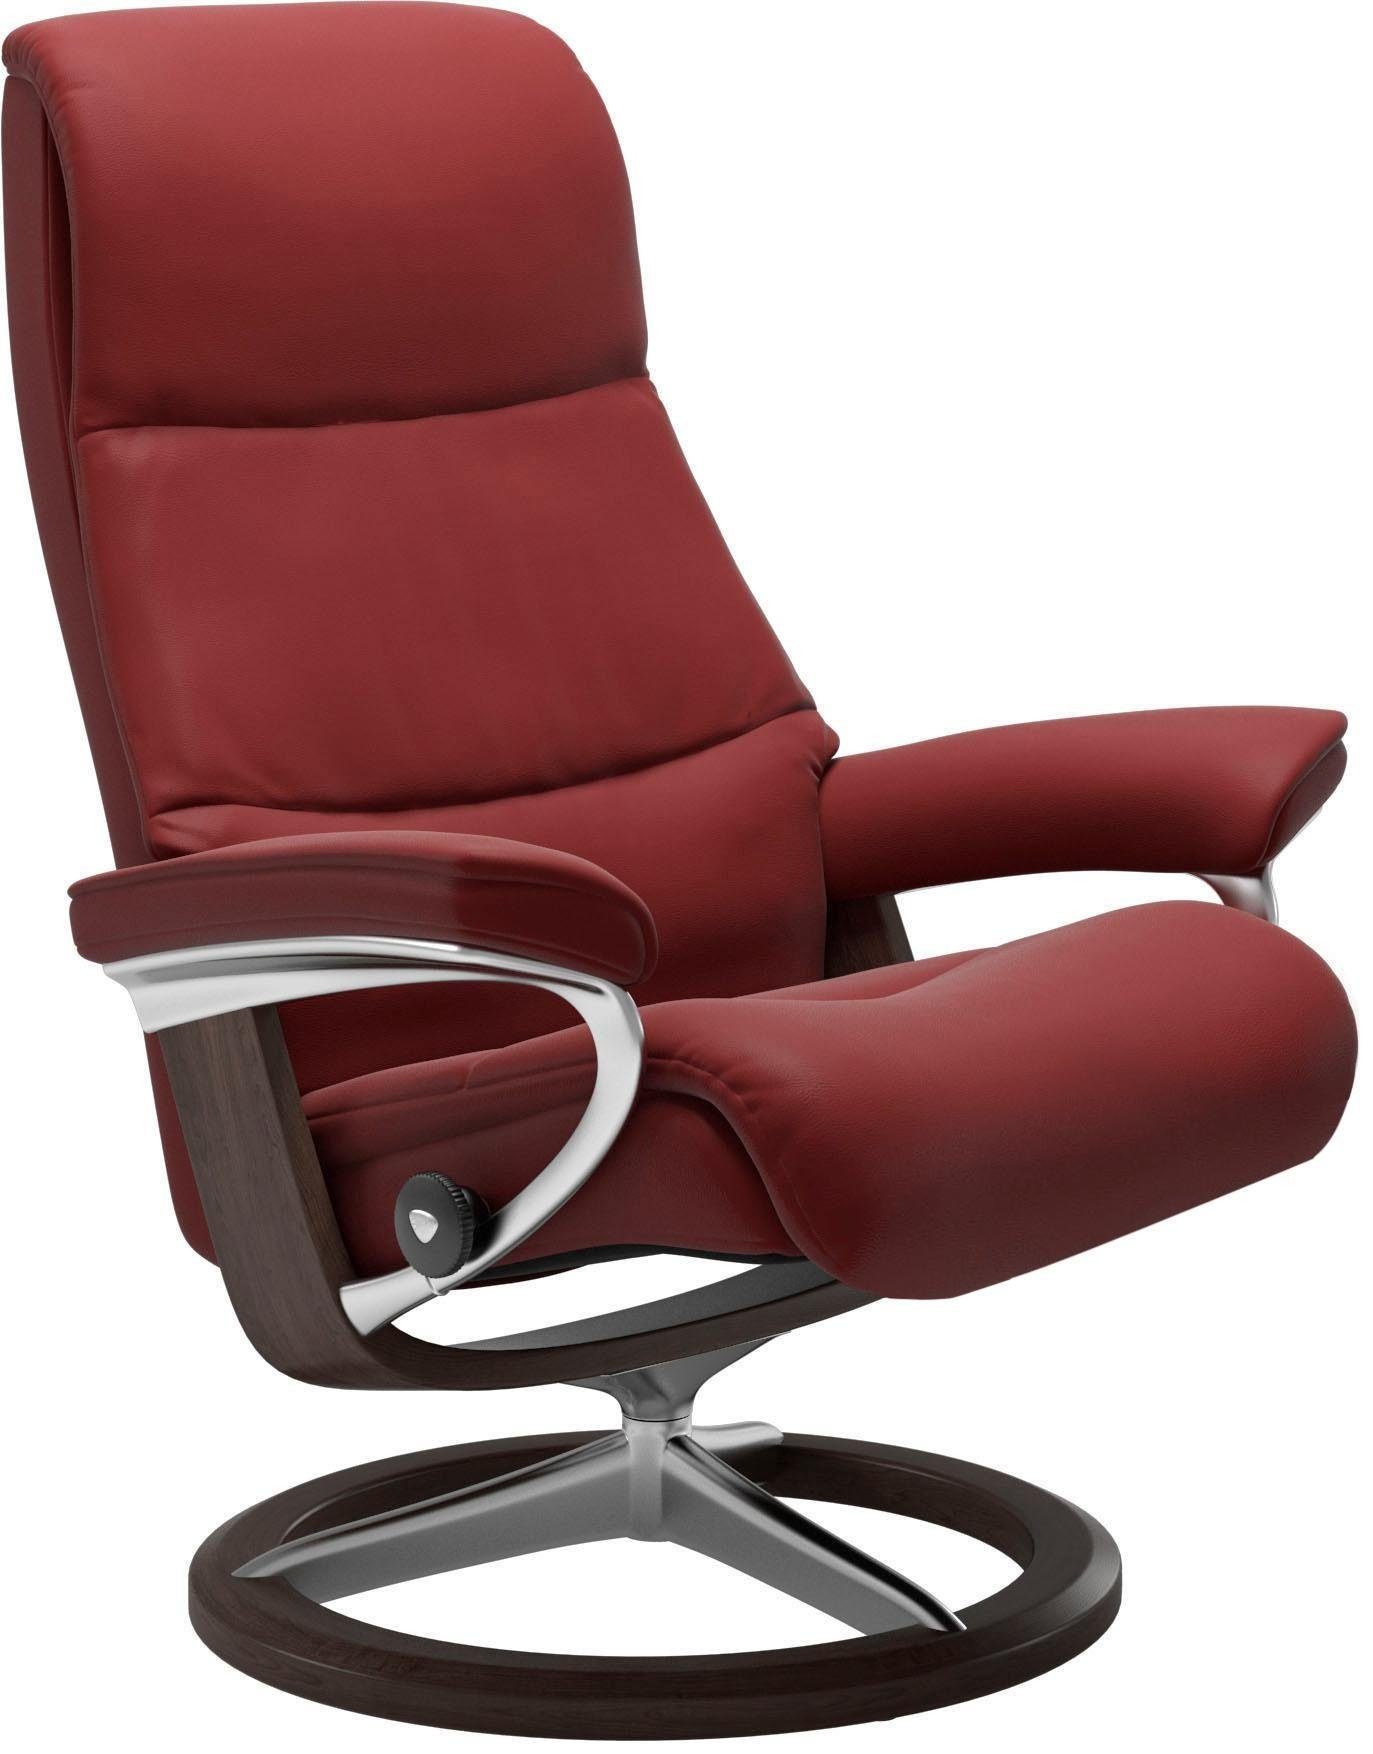 Signature S,Gestell View, Relaxsessel Stressless® Größe mit Base, Wenge